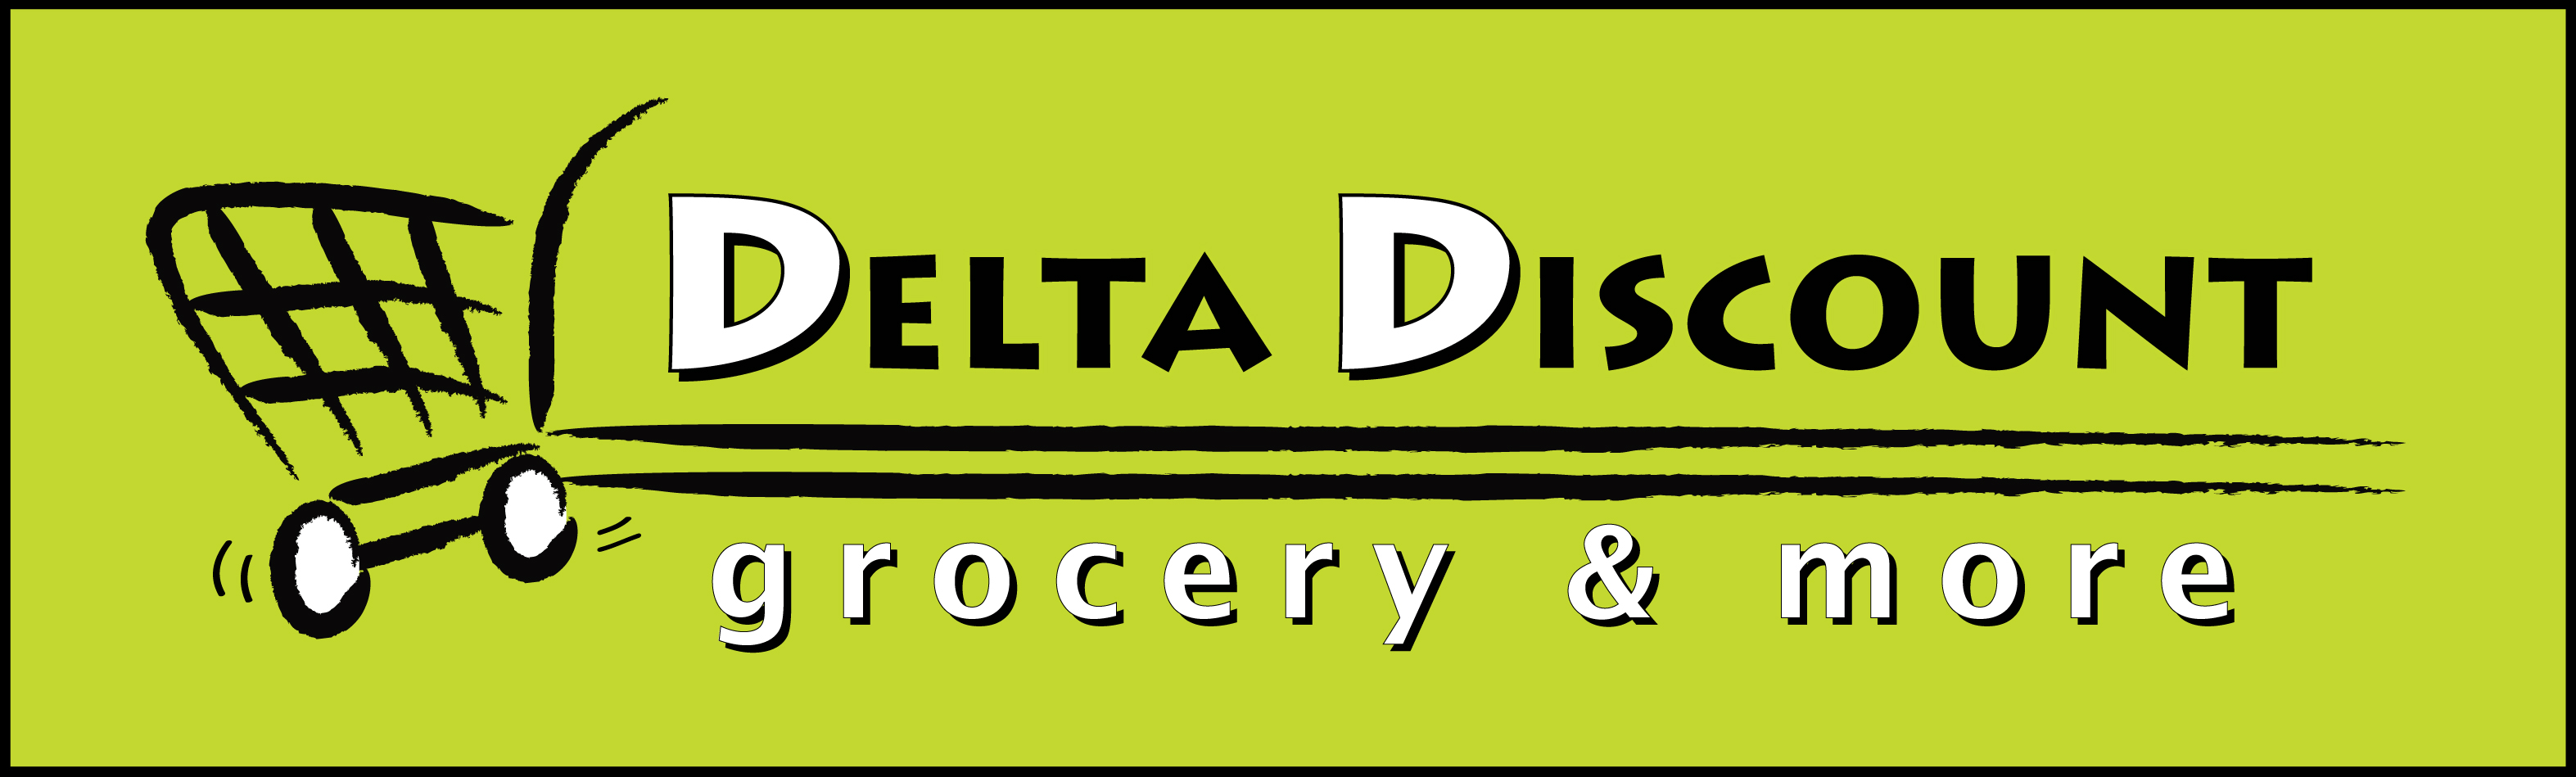 Delta Discount Grocery & More Logo